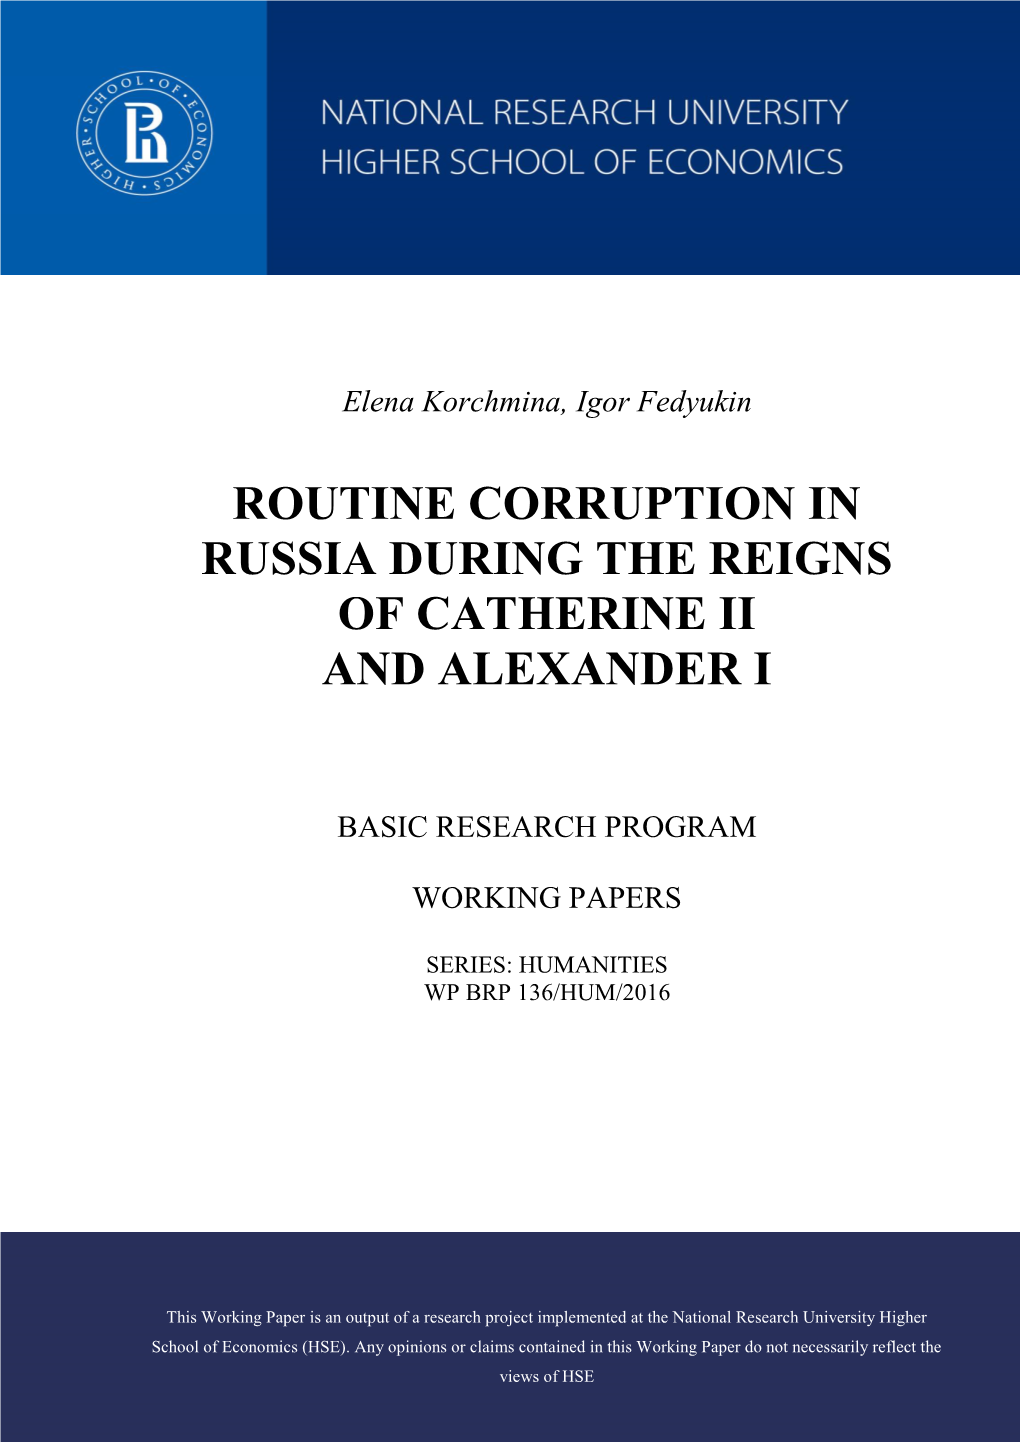 Routine Corruption in Russia During the Reigns of Catherine Ii and Alexander I